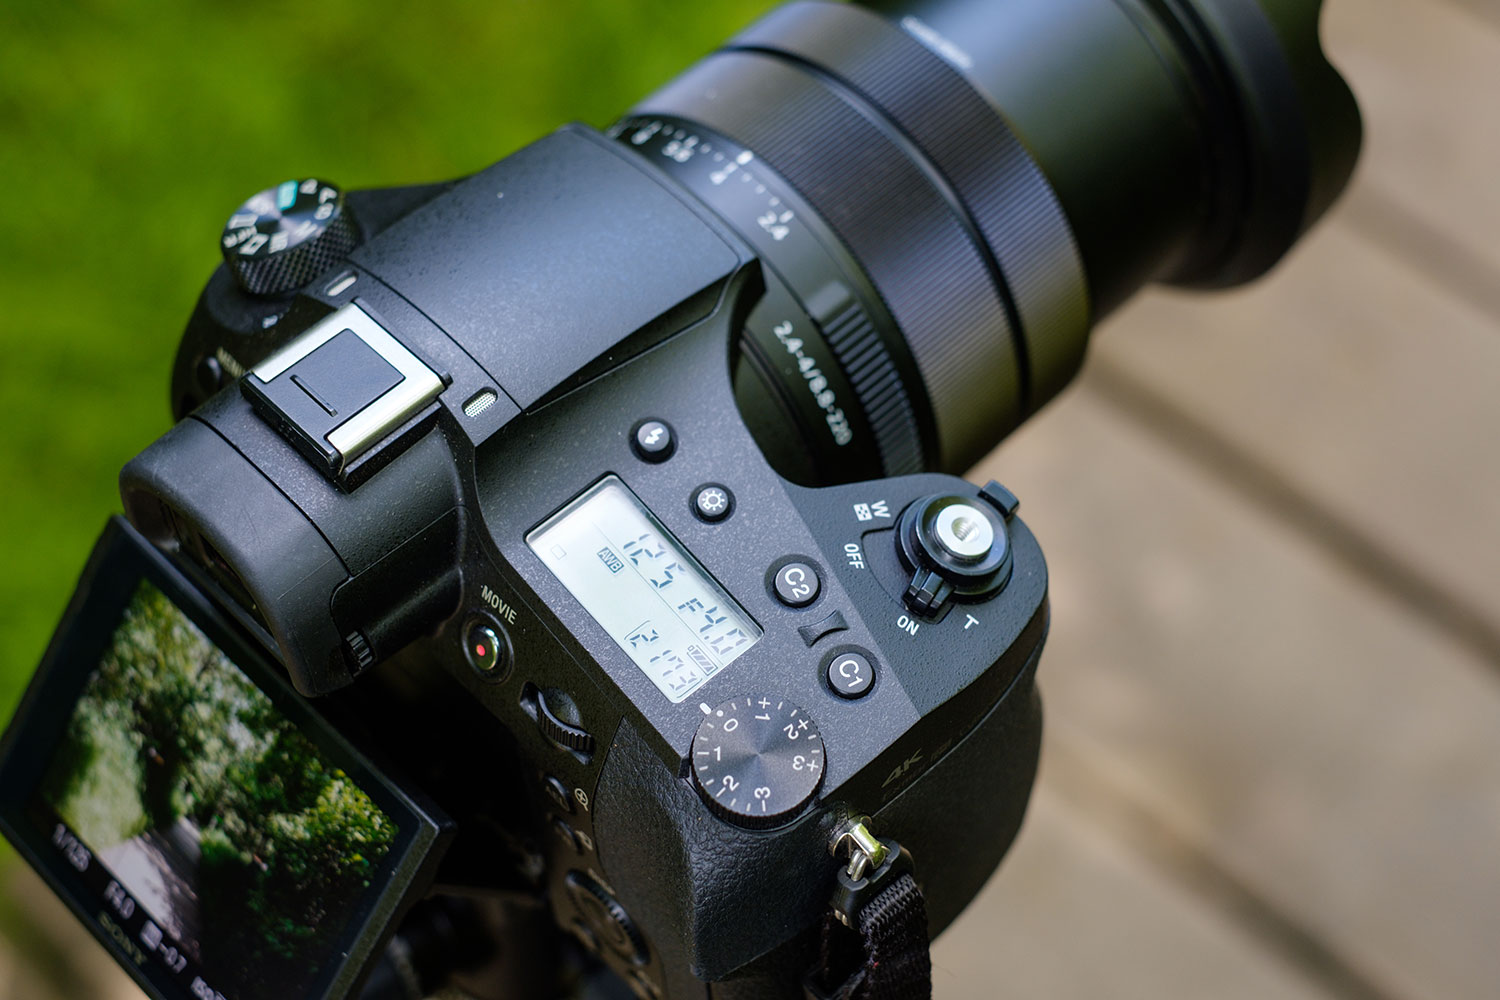 Sony RX10 IV Review